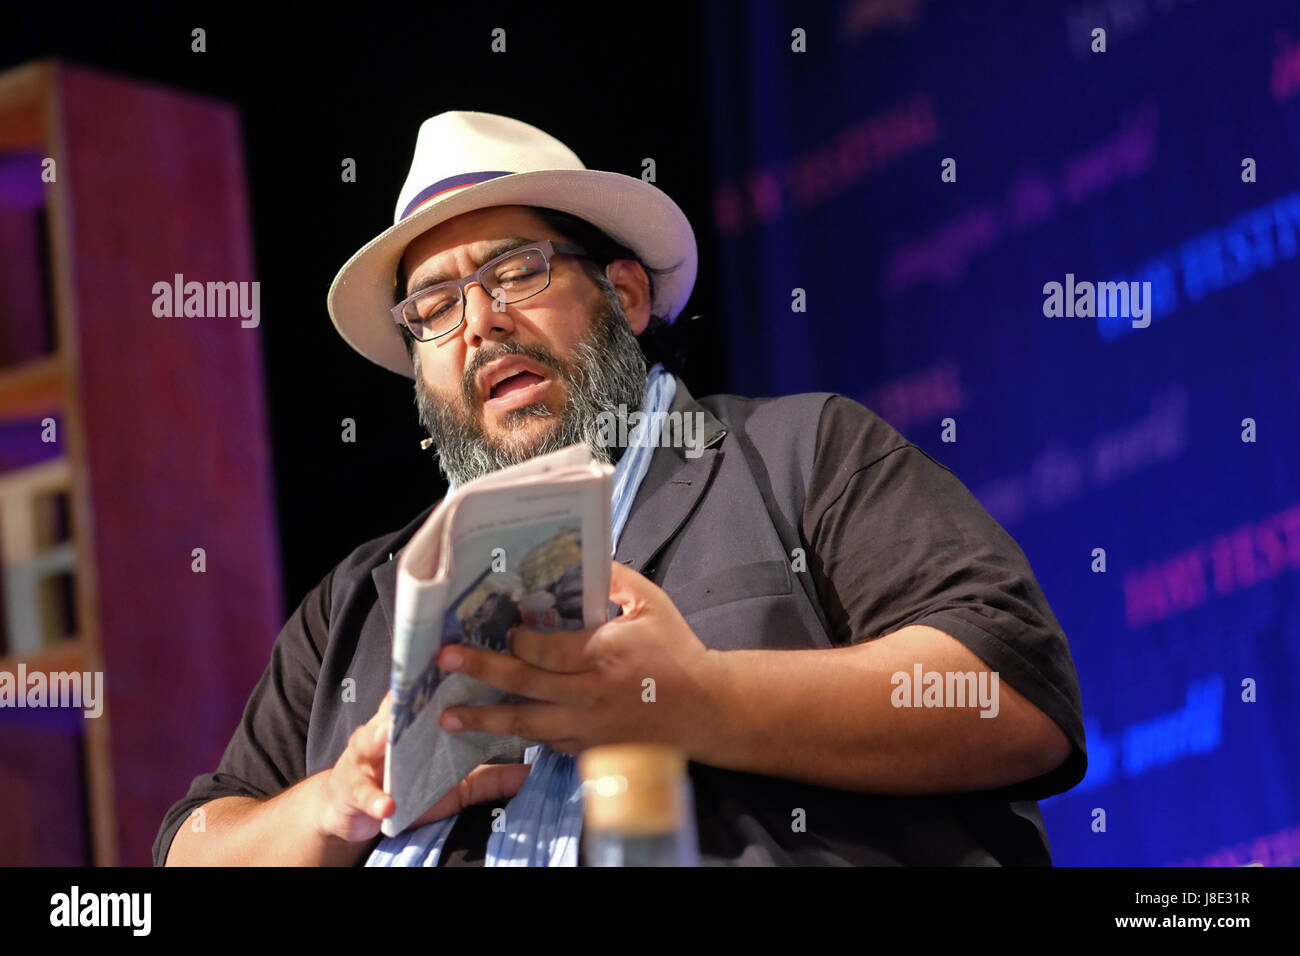 Hay Festival 2017 - Hay on Wye, Wales, UK - Sunday 28th May 2017 - Journalist Abdul Rehman-Malik on stage at the Hay Festival talking about Enlightenment and Jihad - the Hay Festival celebrates its 30th anniversary in 2017 - the literary festival runs until Sunday June 4th. Credit: Steven May/Alamy Live News Stock Photo